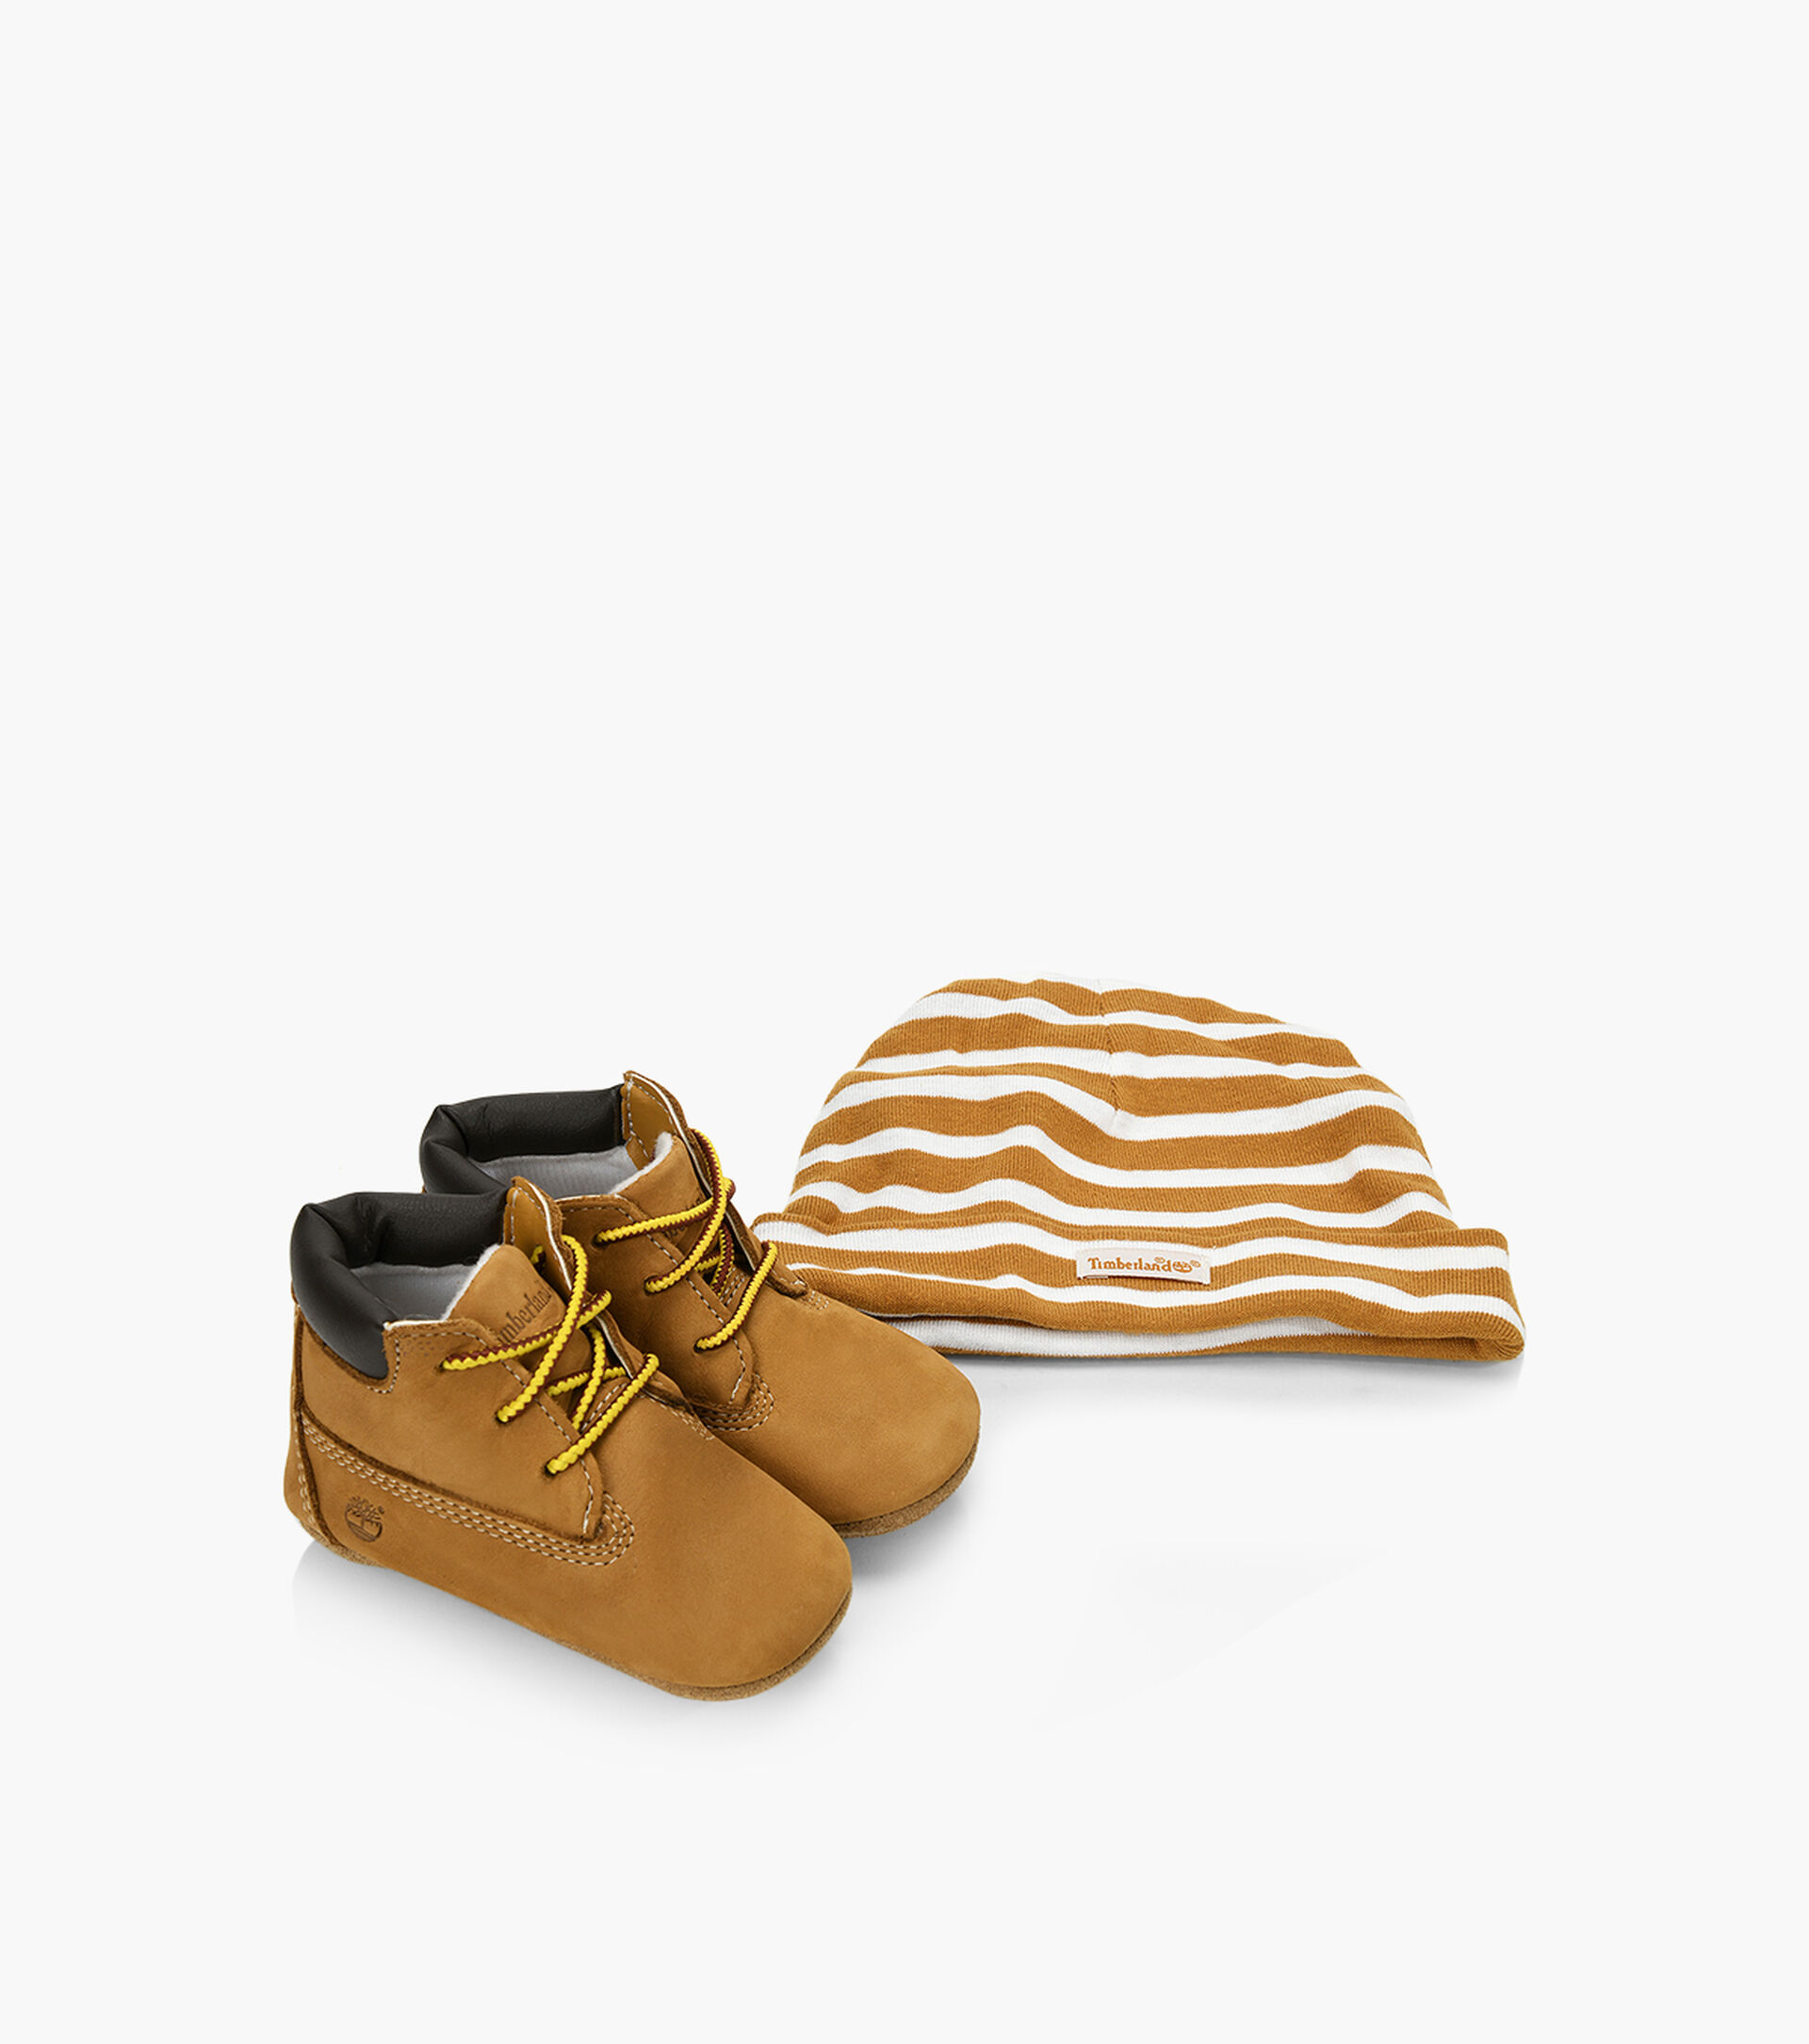 TIMBERLAND CRIB BOOTIE WITH HAT - Tan | Browns Shoes